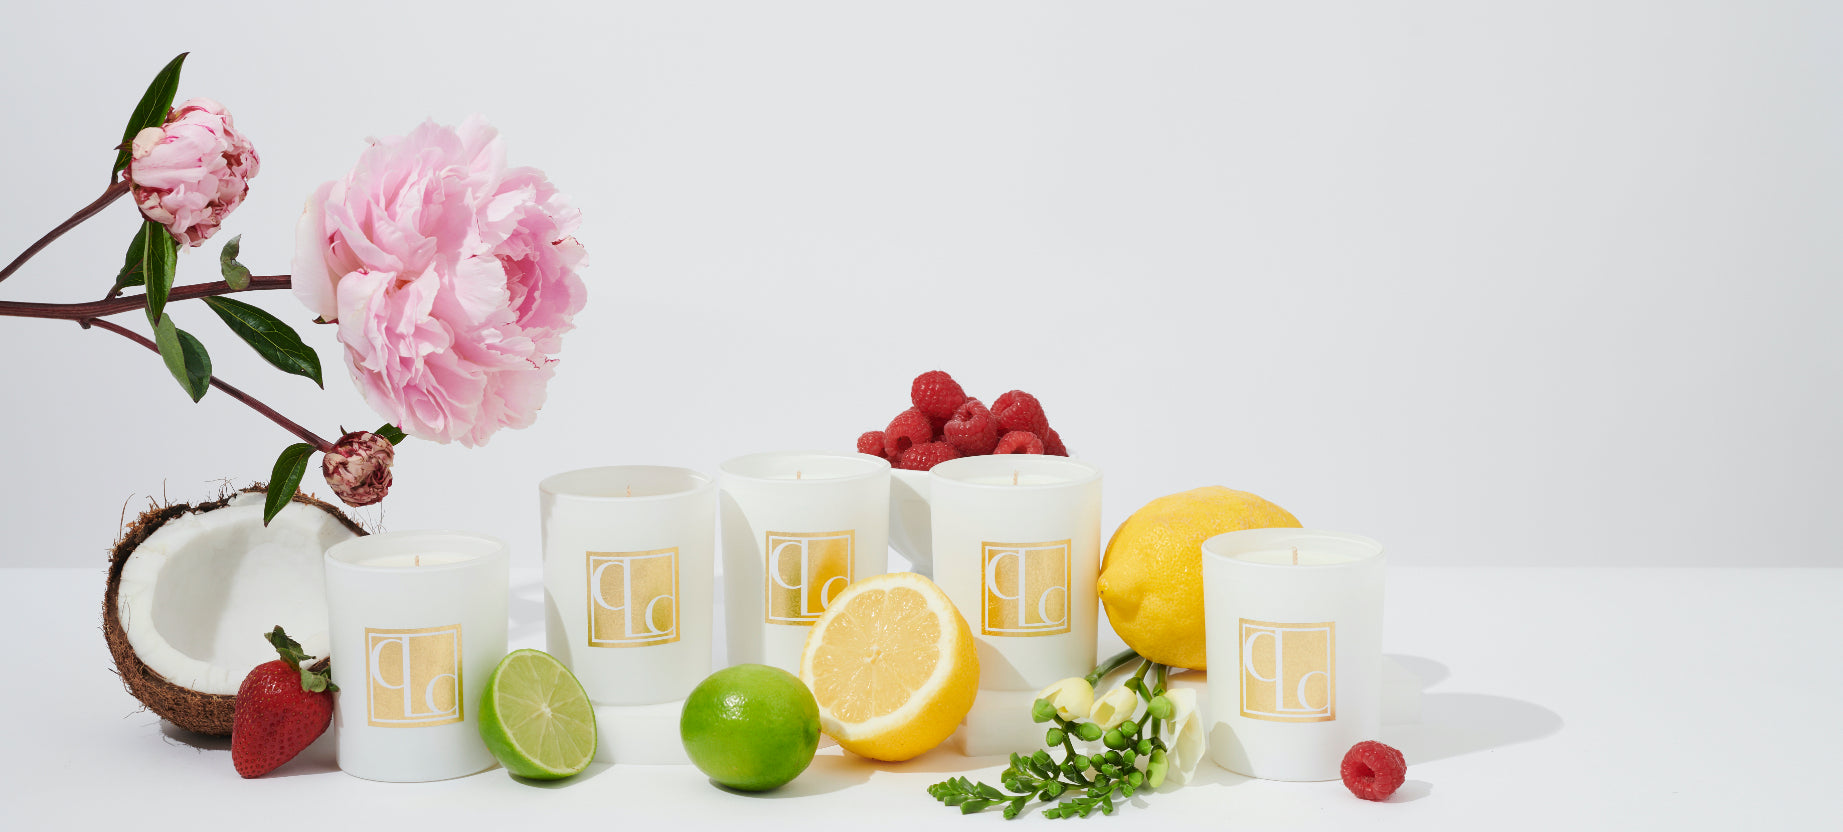 Mini scented candle collection surrounded by fruits and flowers with white background